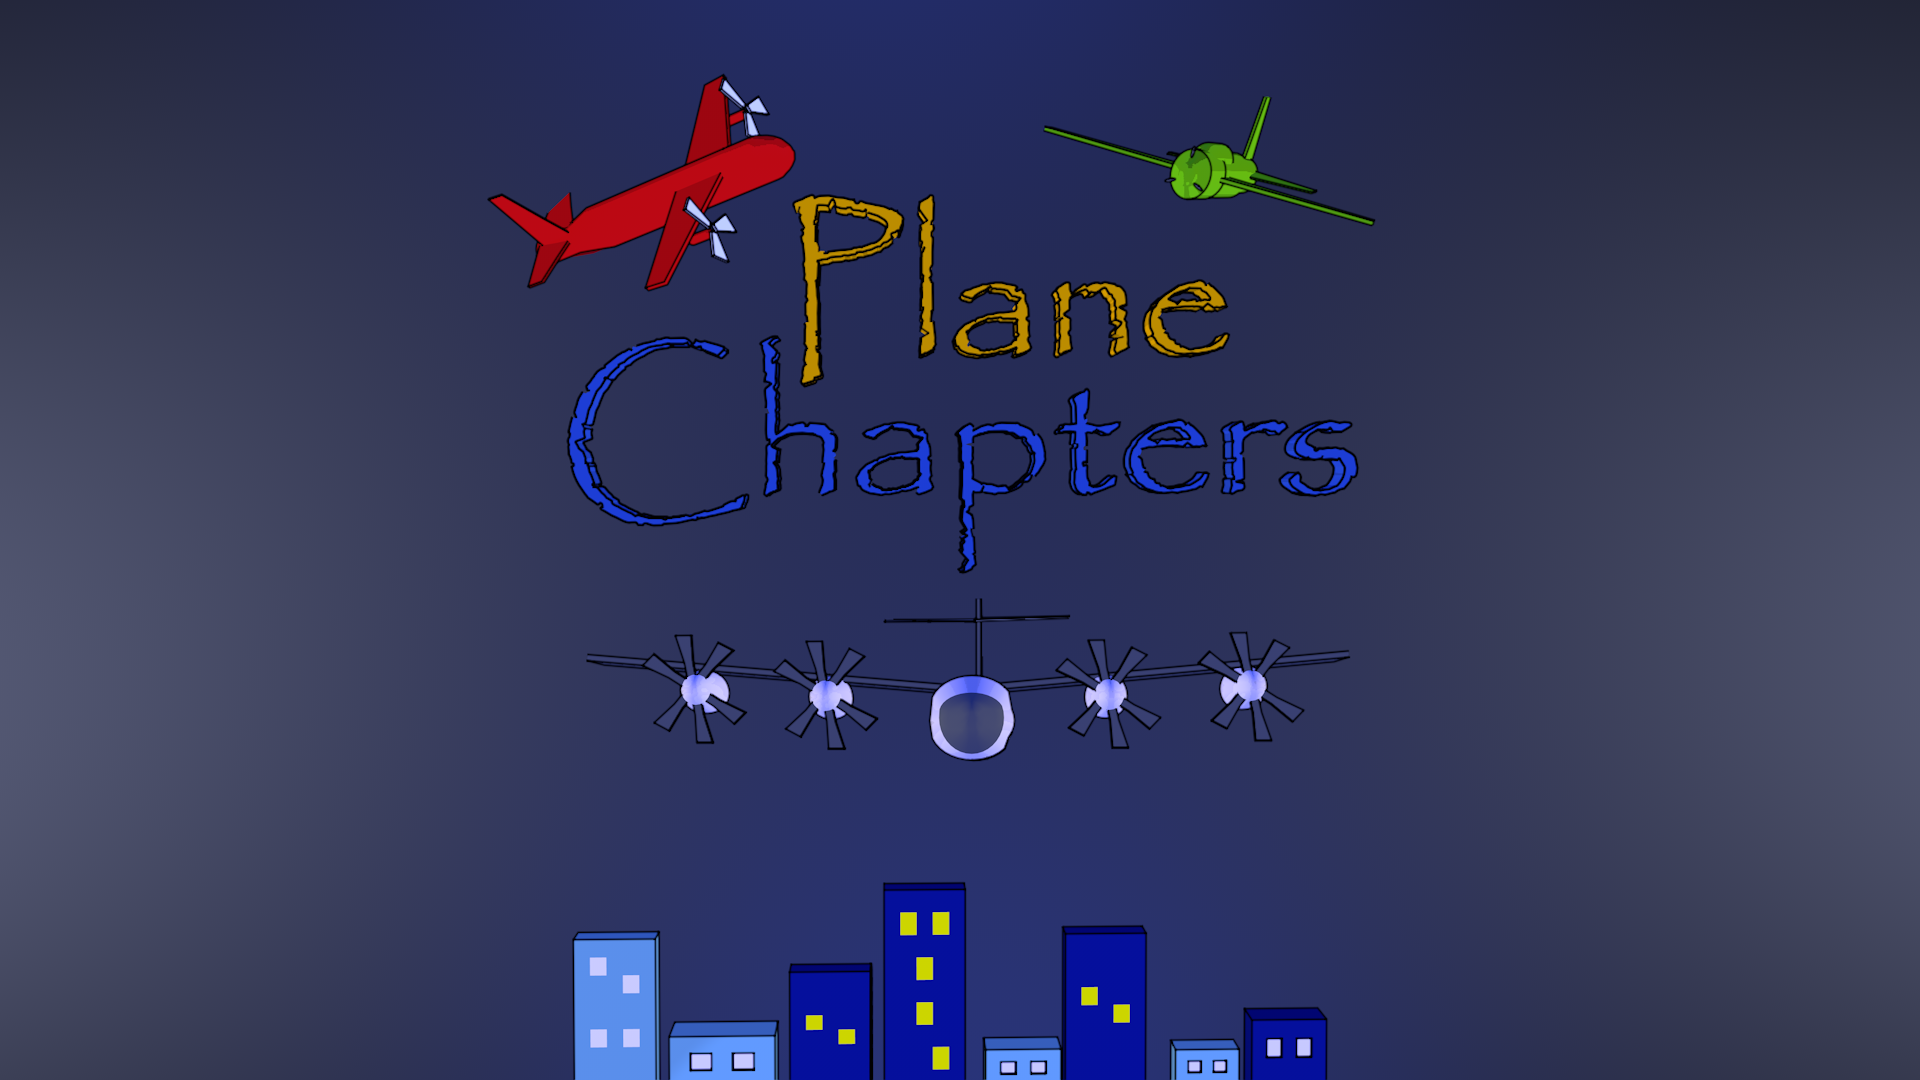 Plane Chapters